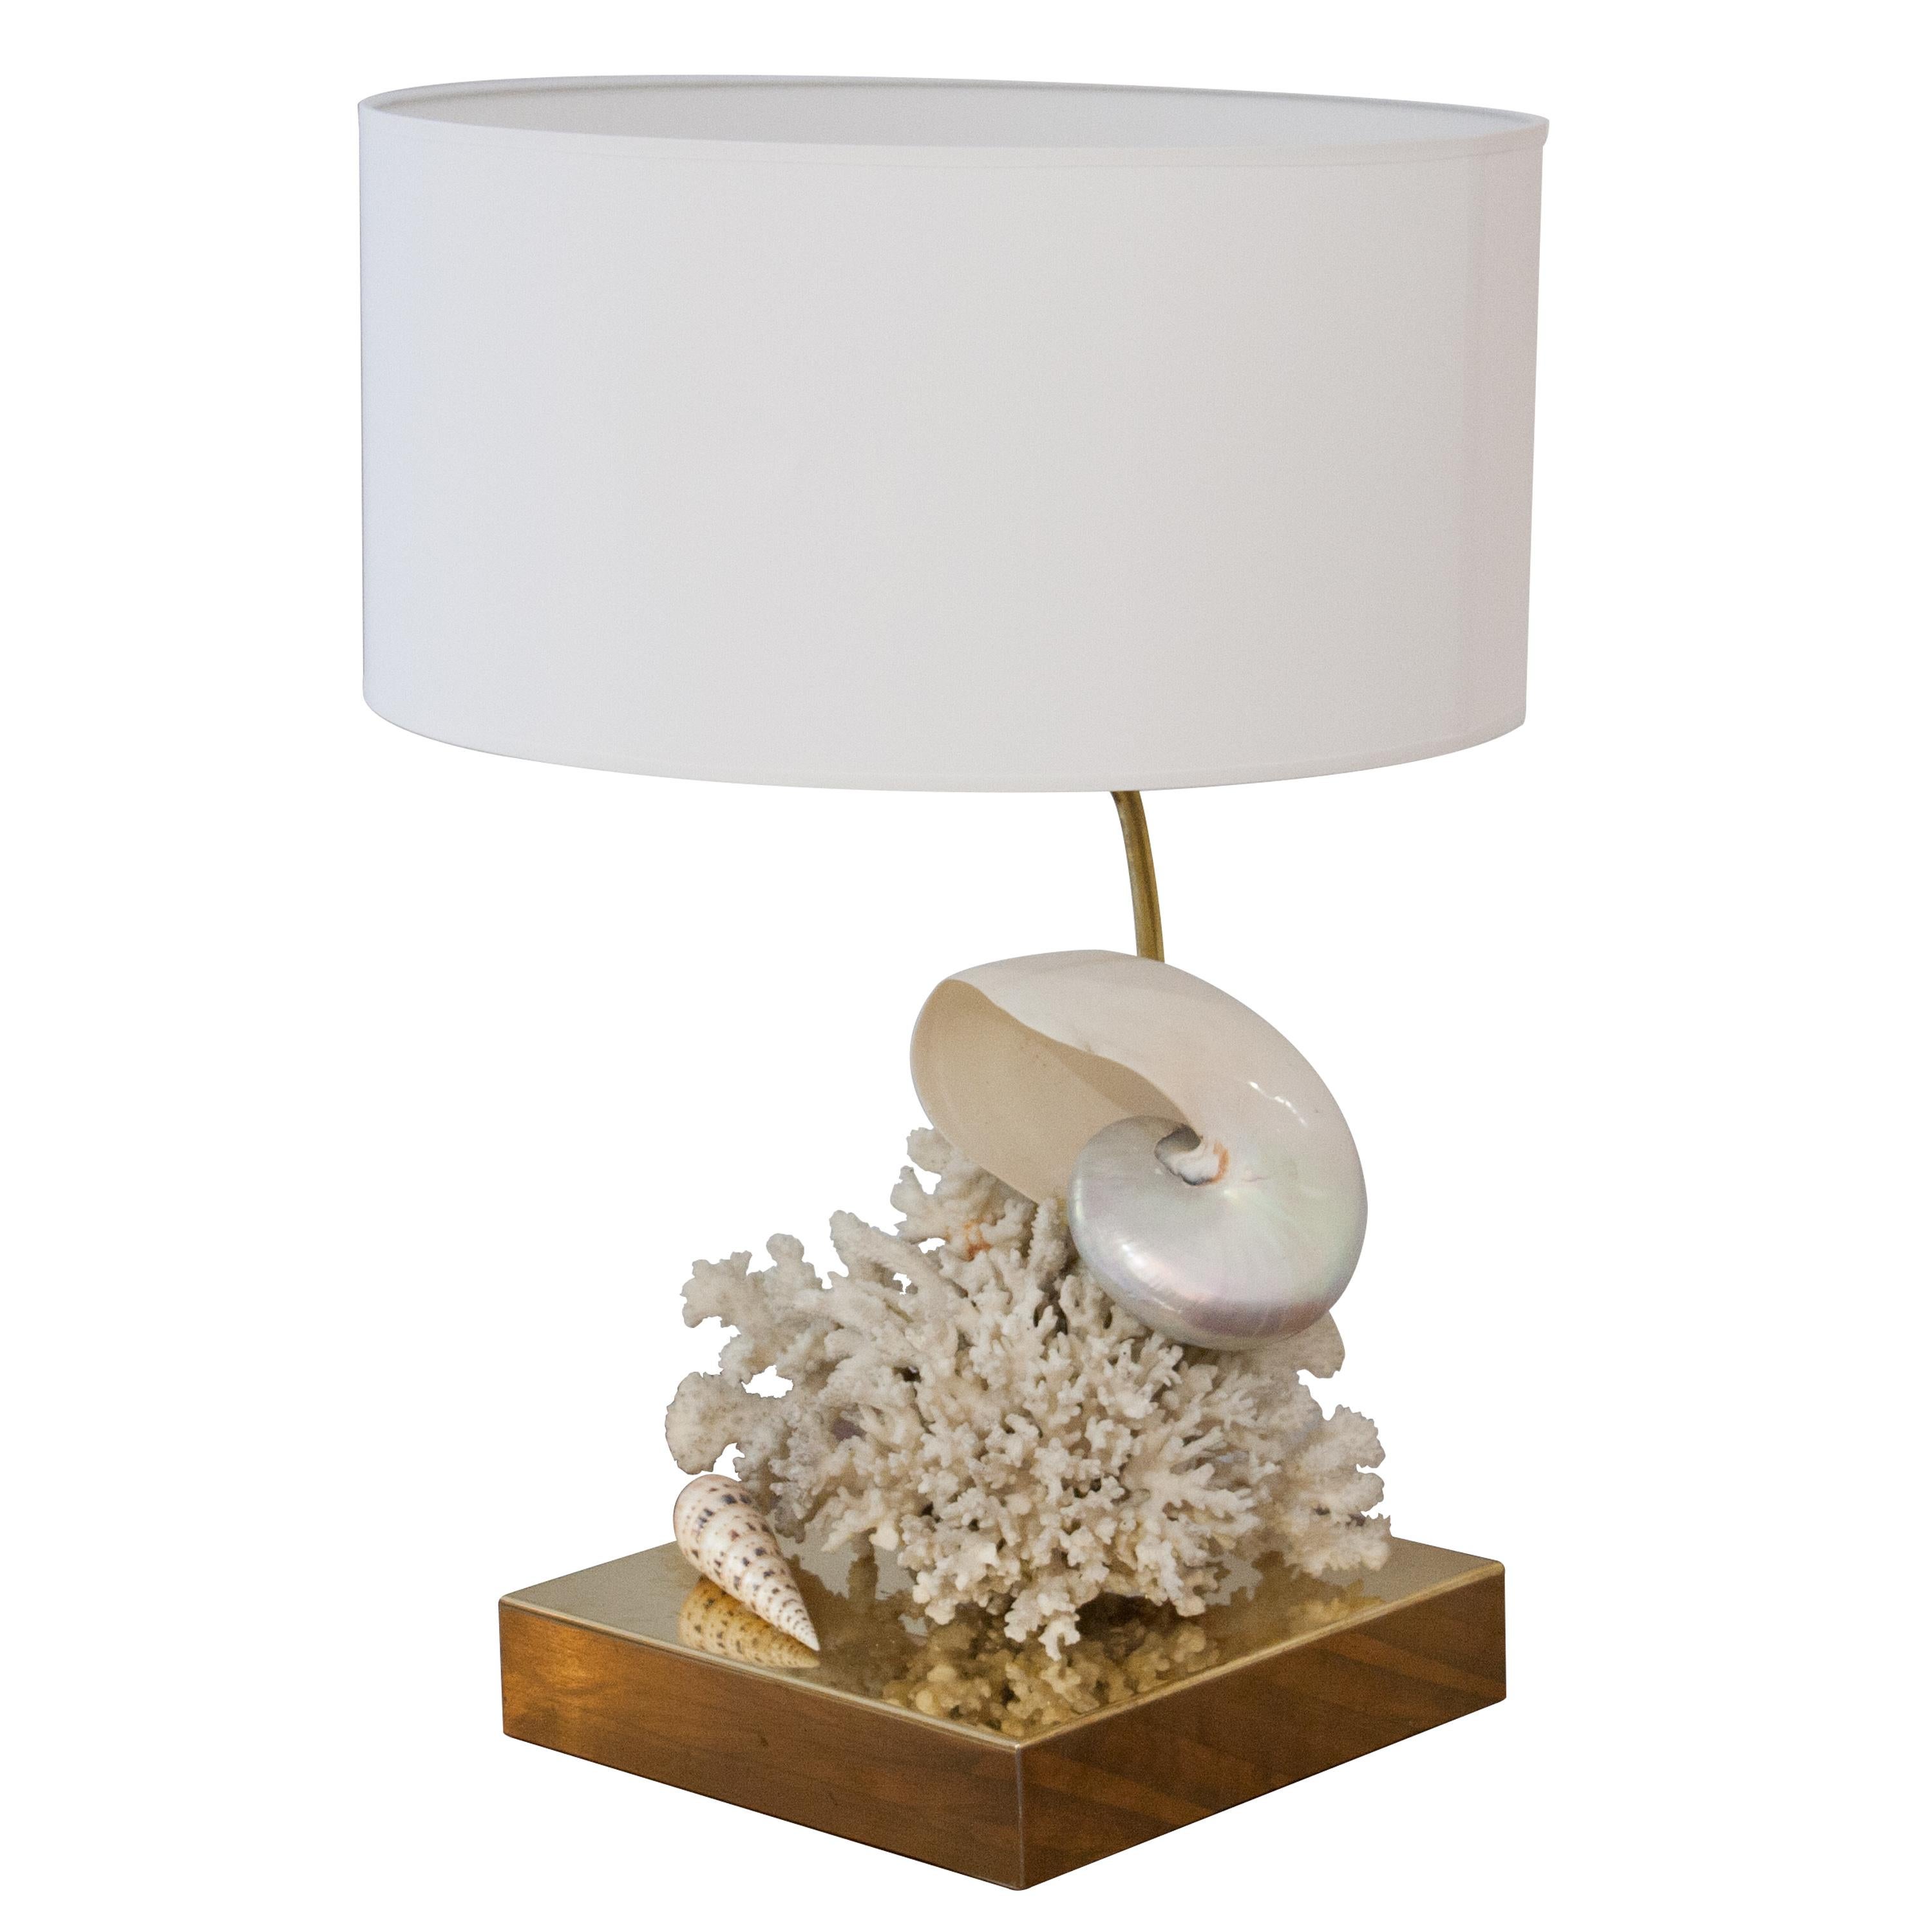 One of a kind hand-crafted pair of table lamps, with brass base and structure and natural seashells and corals. White lamp shade.